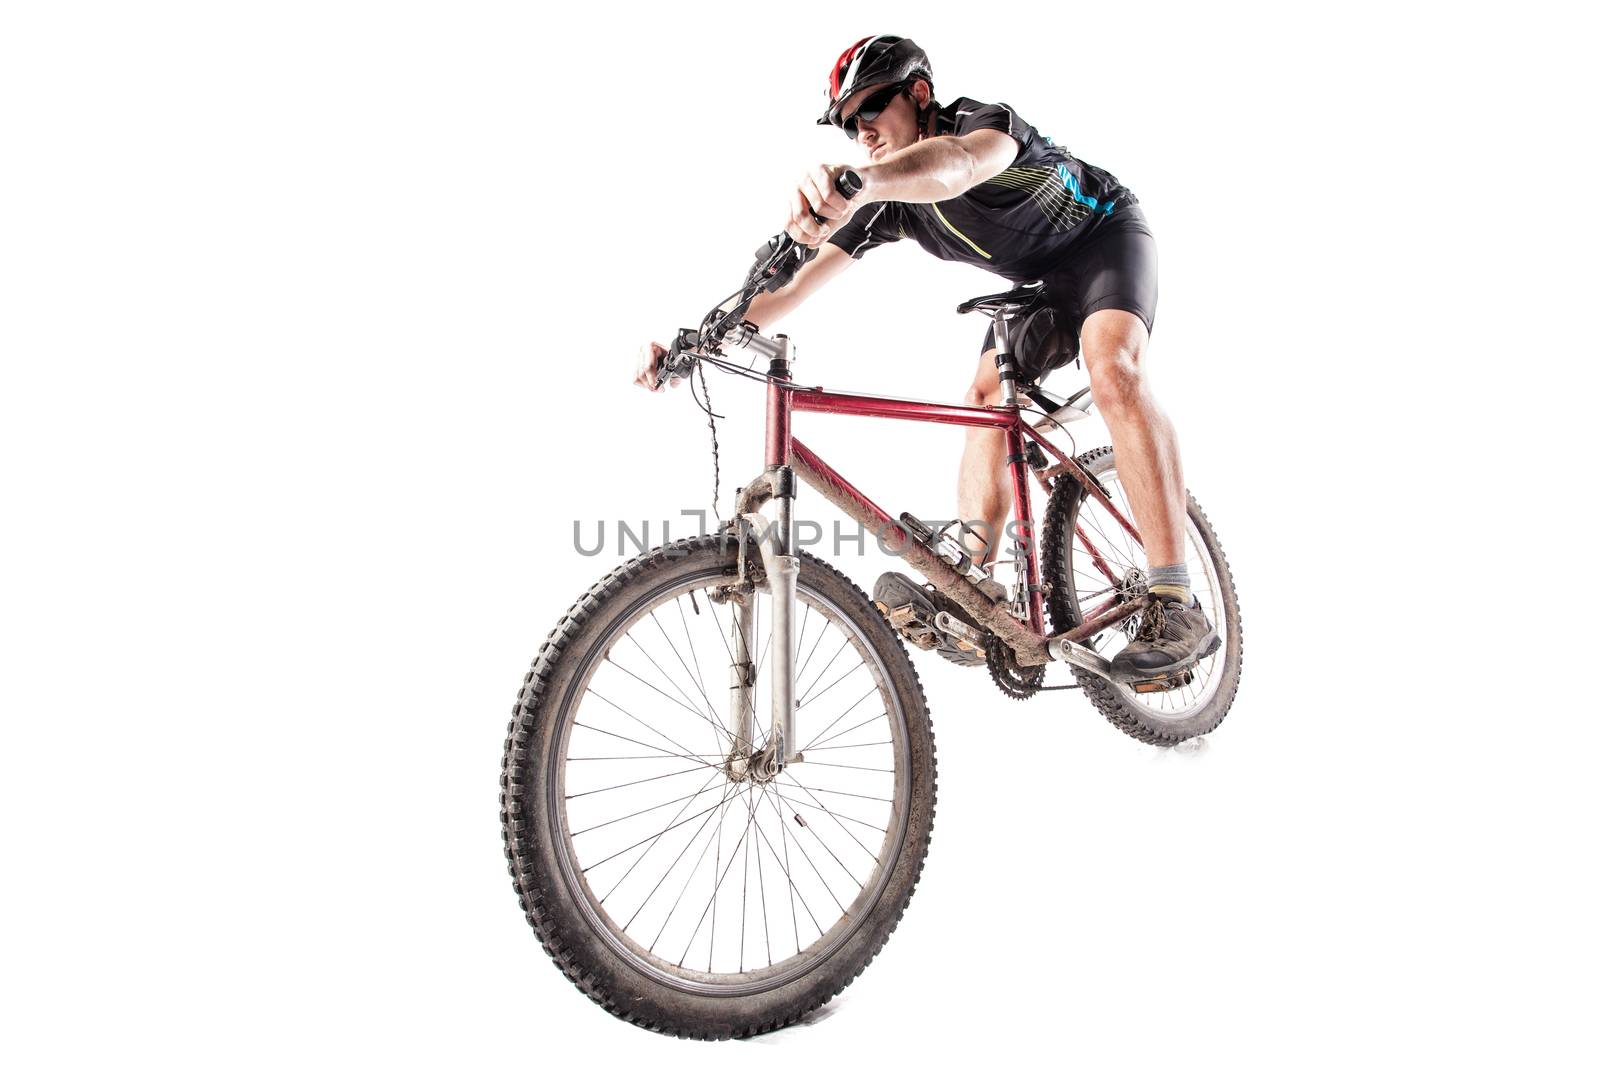 Male bicyclist riding a very dirty mountain bike downhill style